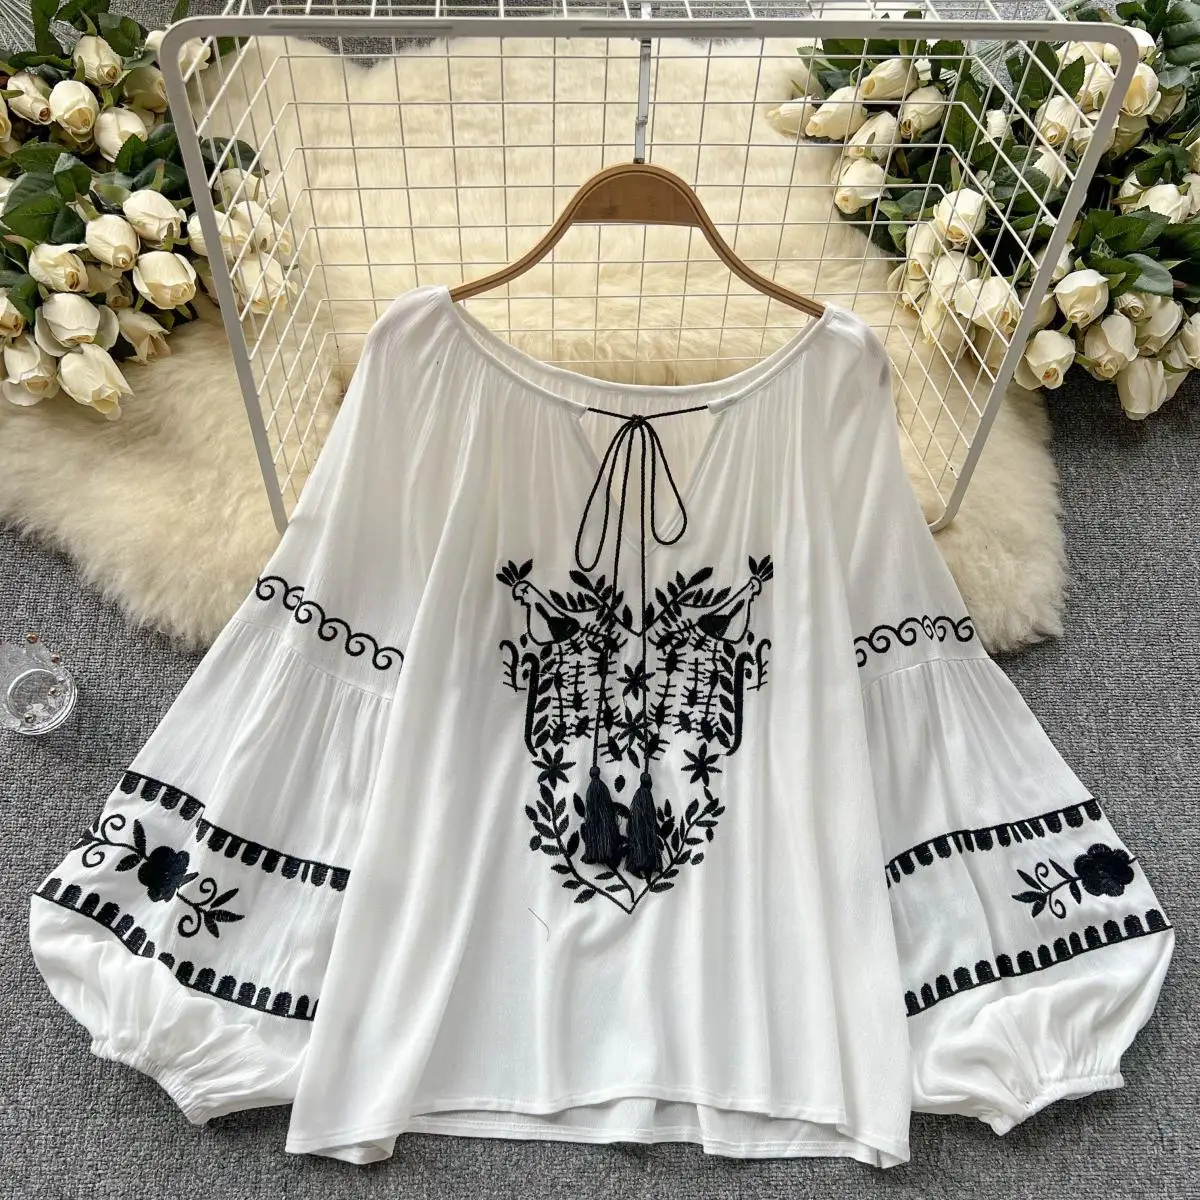 

Cotton Rayon Loose Blusas Boho Casual O-neck Lantern Sleeve Summer Blouses Floral Embroidery Blouse Shirt for Women Tops